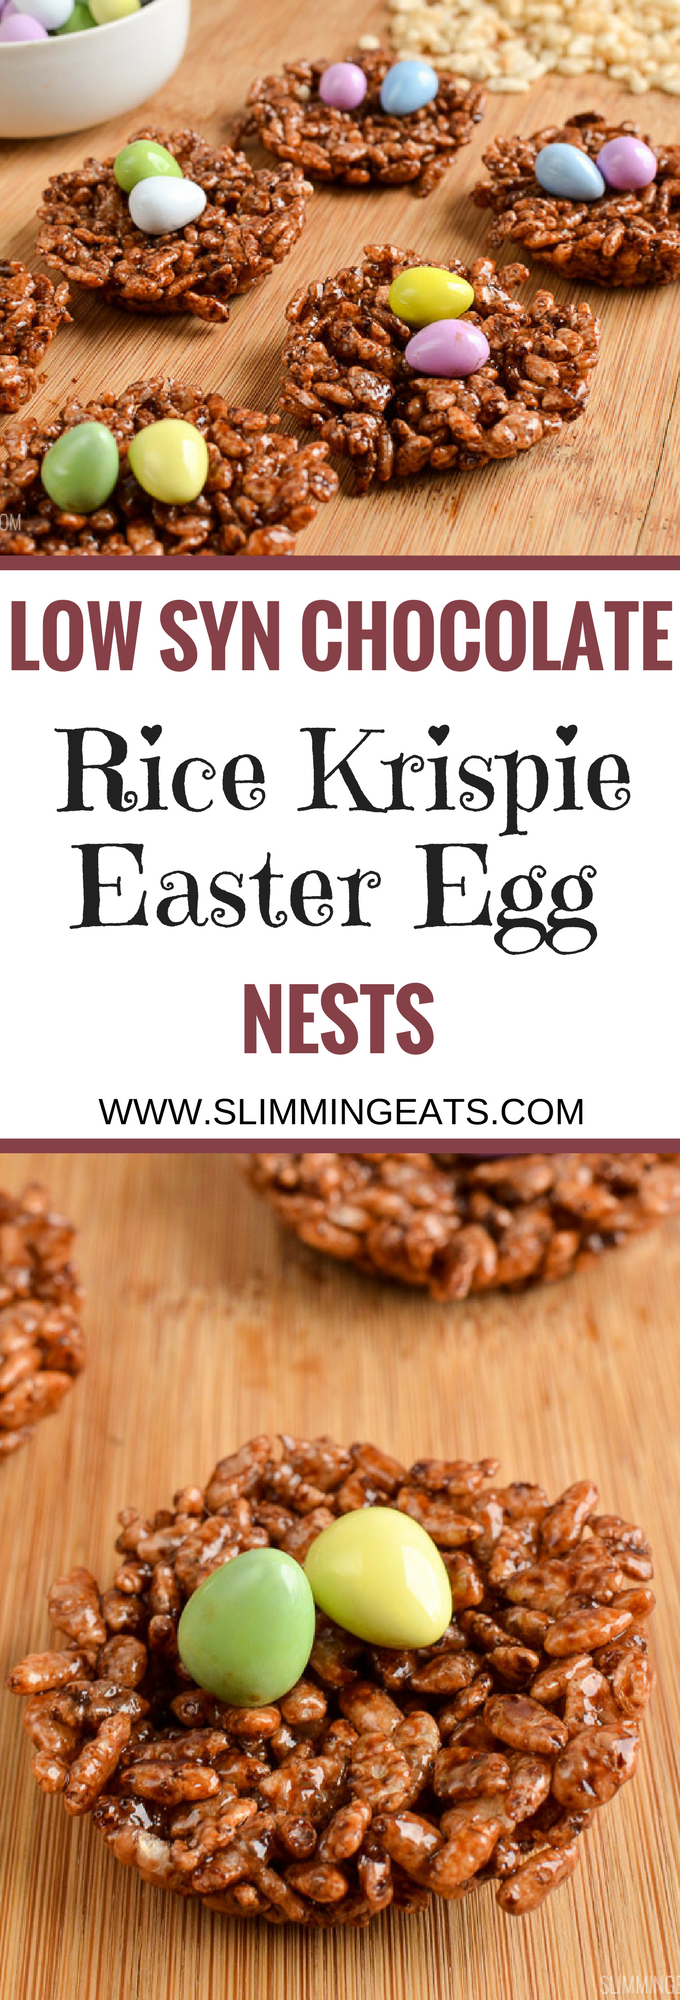 Slimming Eats Low Syn Chocolate Rice Krispie Easter Egg Nests - vegetarian, Slimming World and Weight Watchers friendly